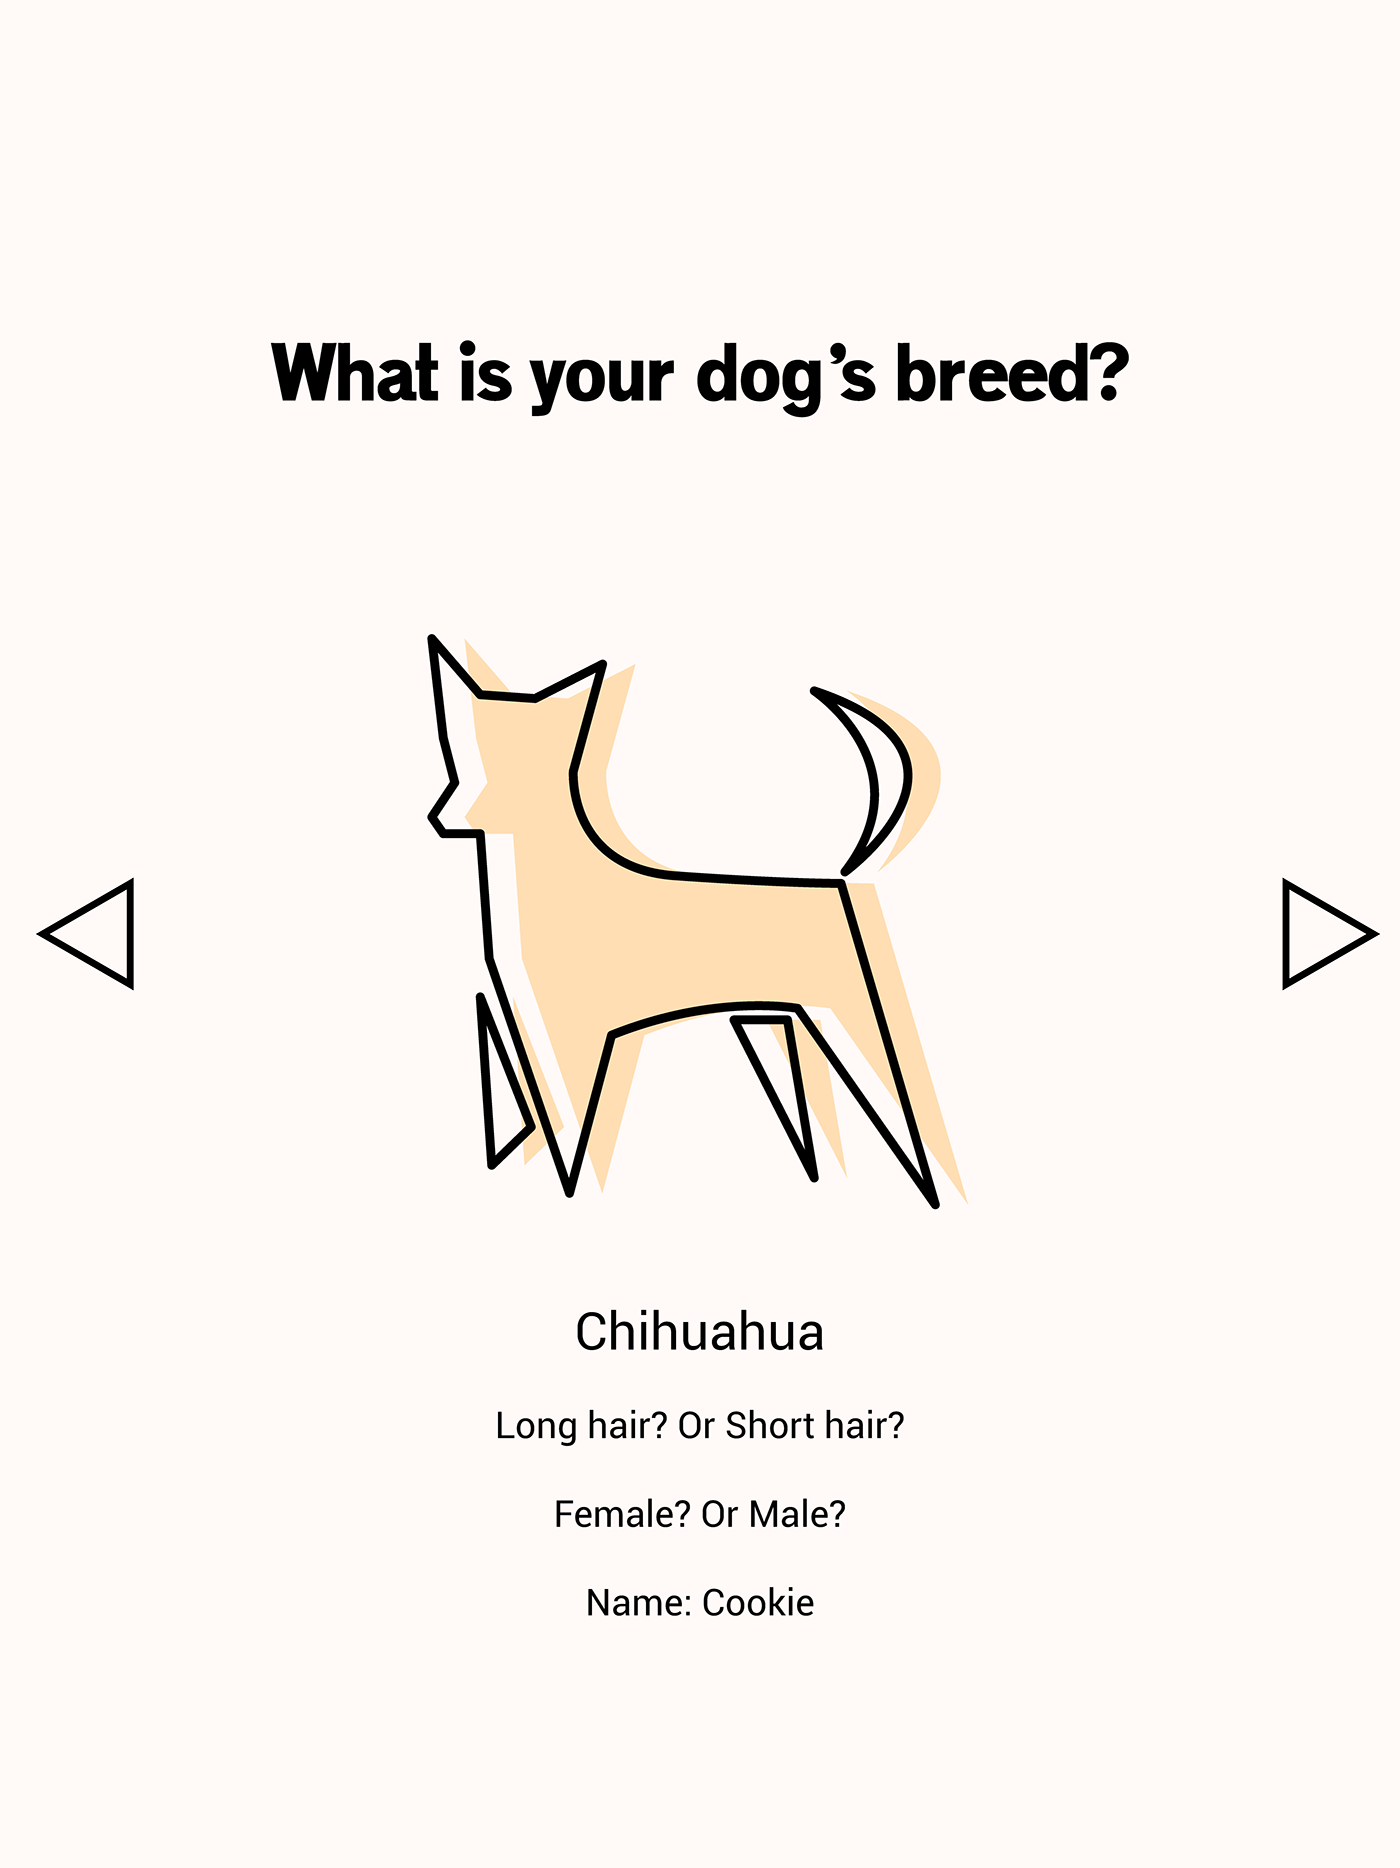 dog app application iphone Samsung android Pet family minimalist simple